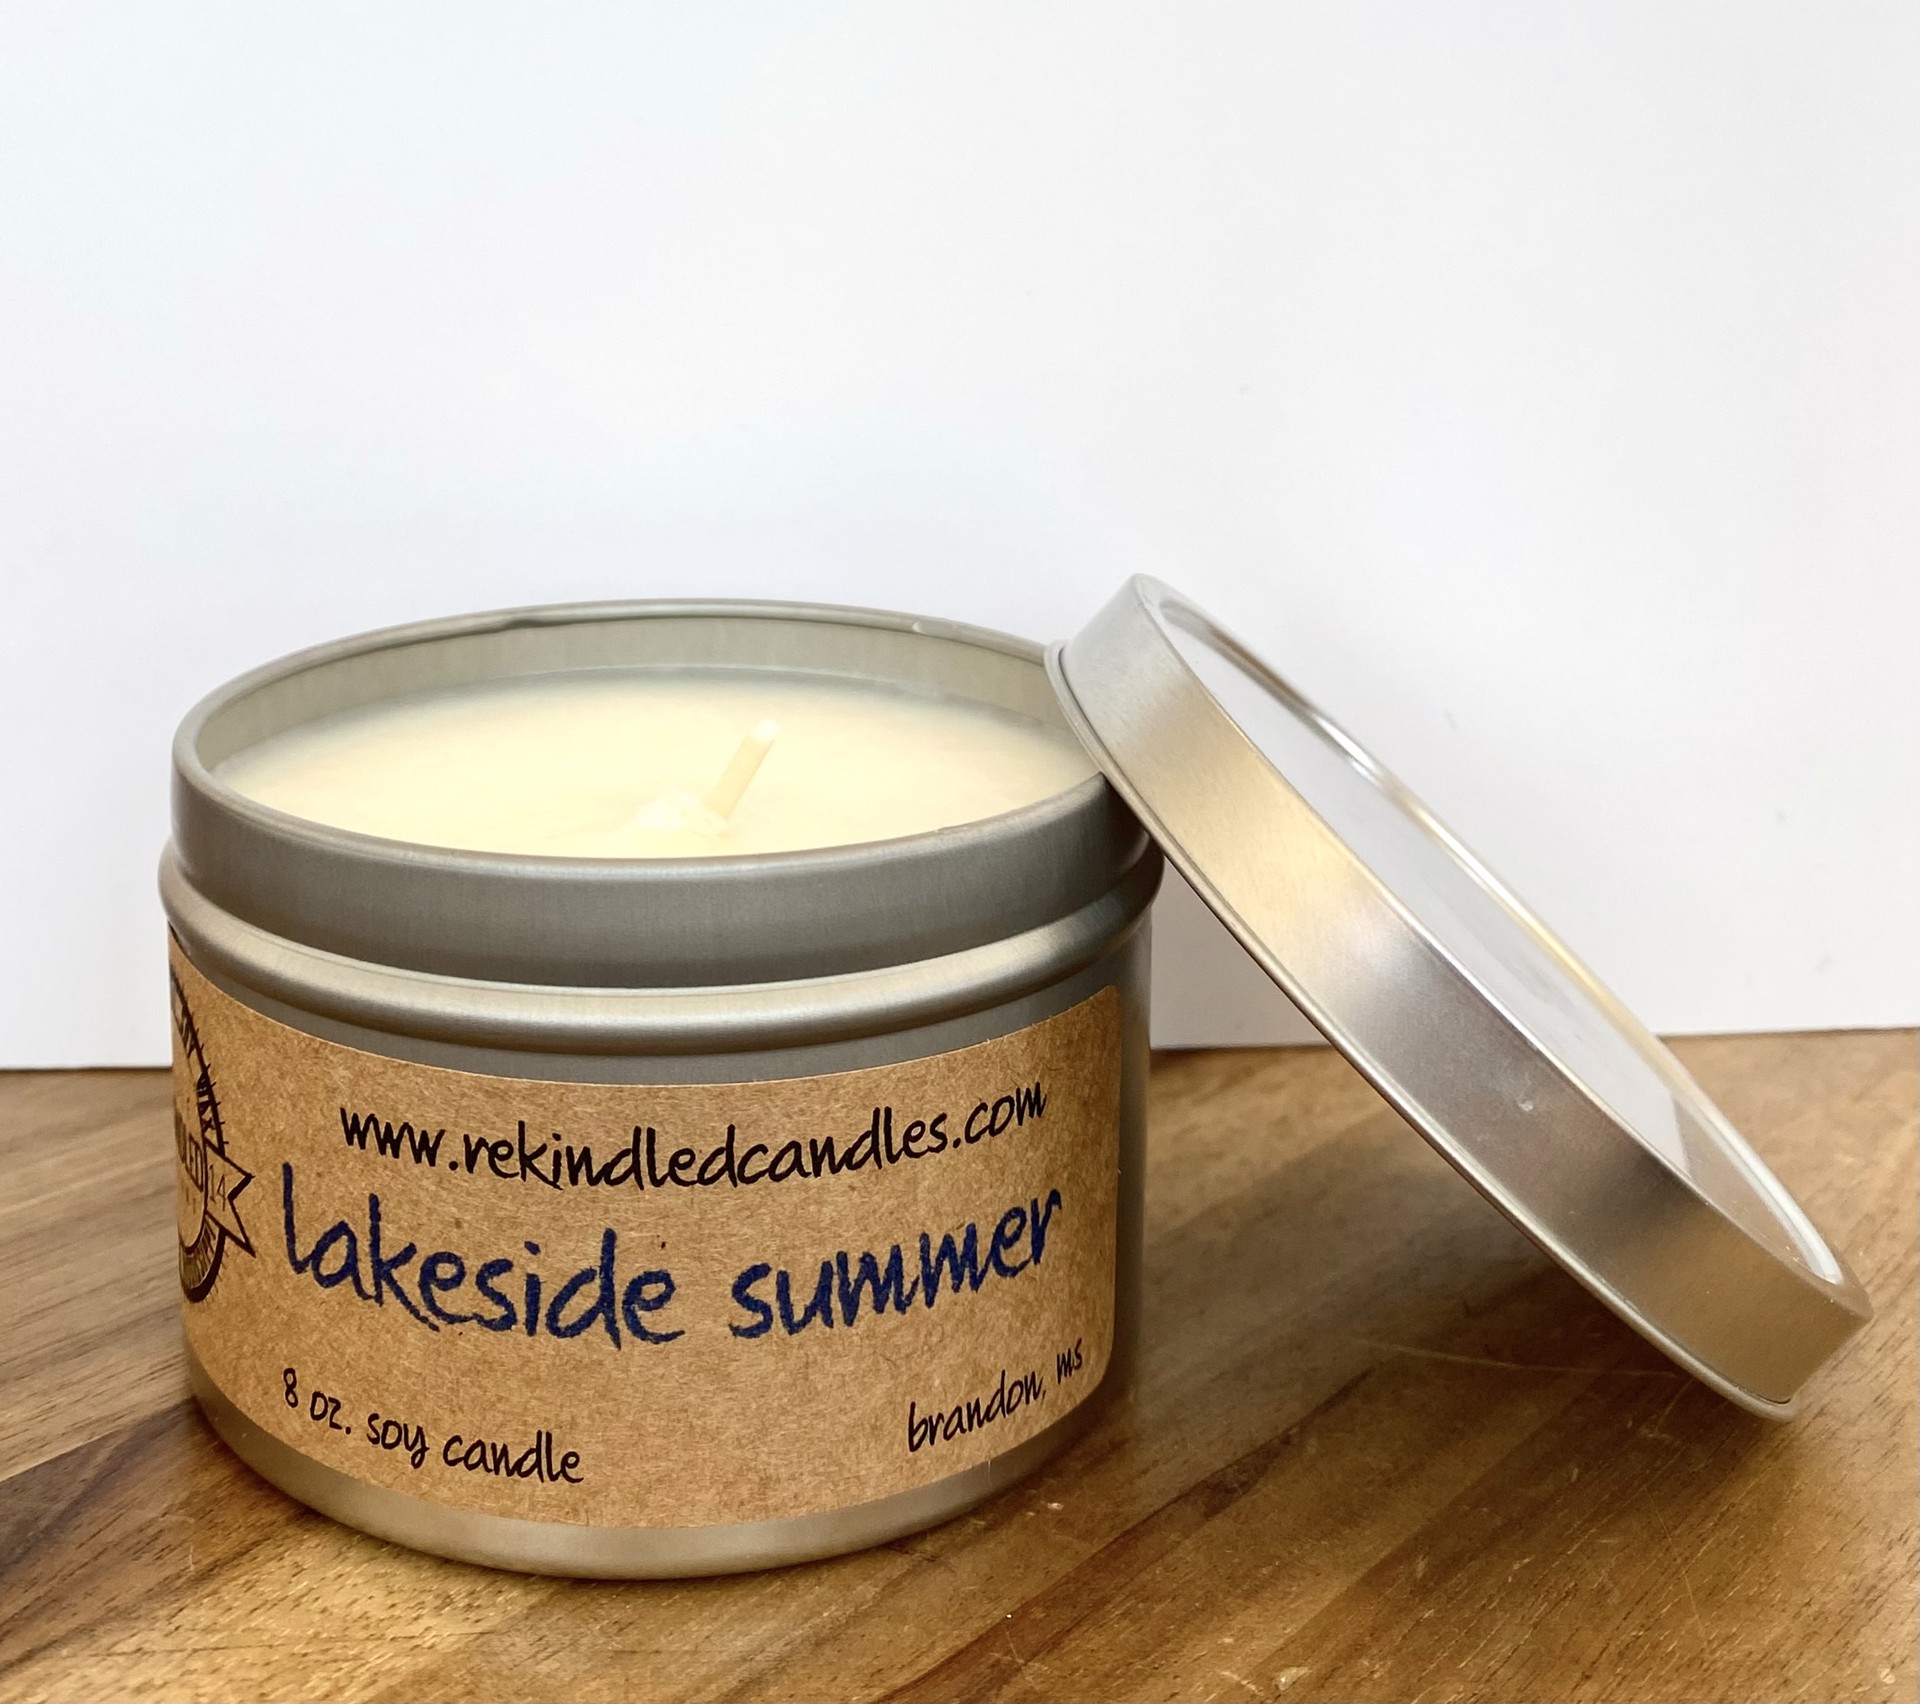 Lakeside Summer Candle Tin by re-kindled candle company